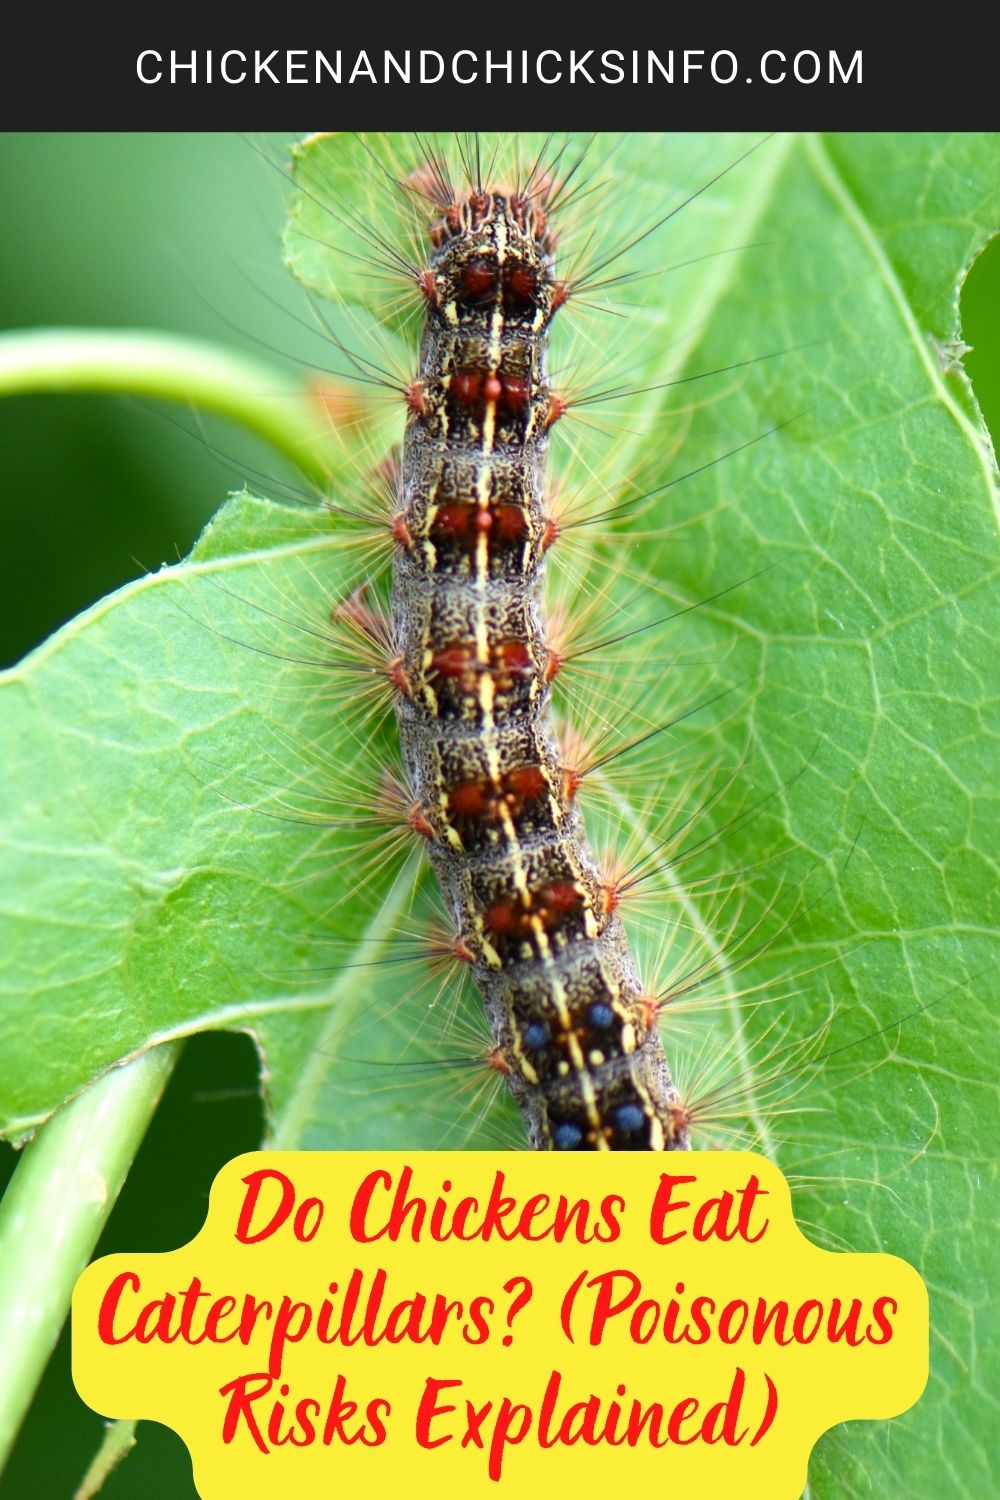 Do Chickens Eat Caterpillars? (Poisonous Risks Explained) poster.
